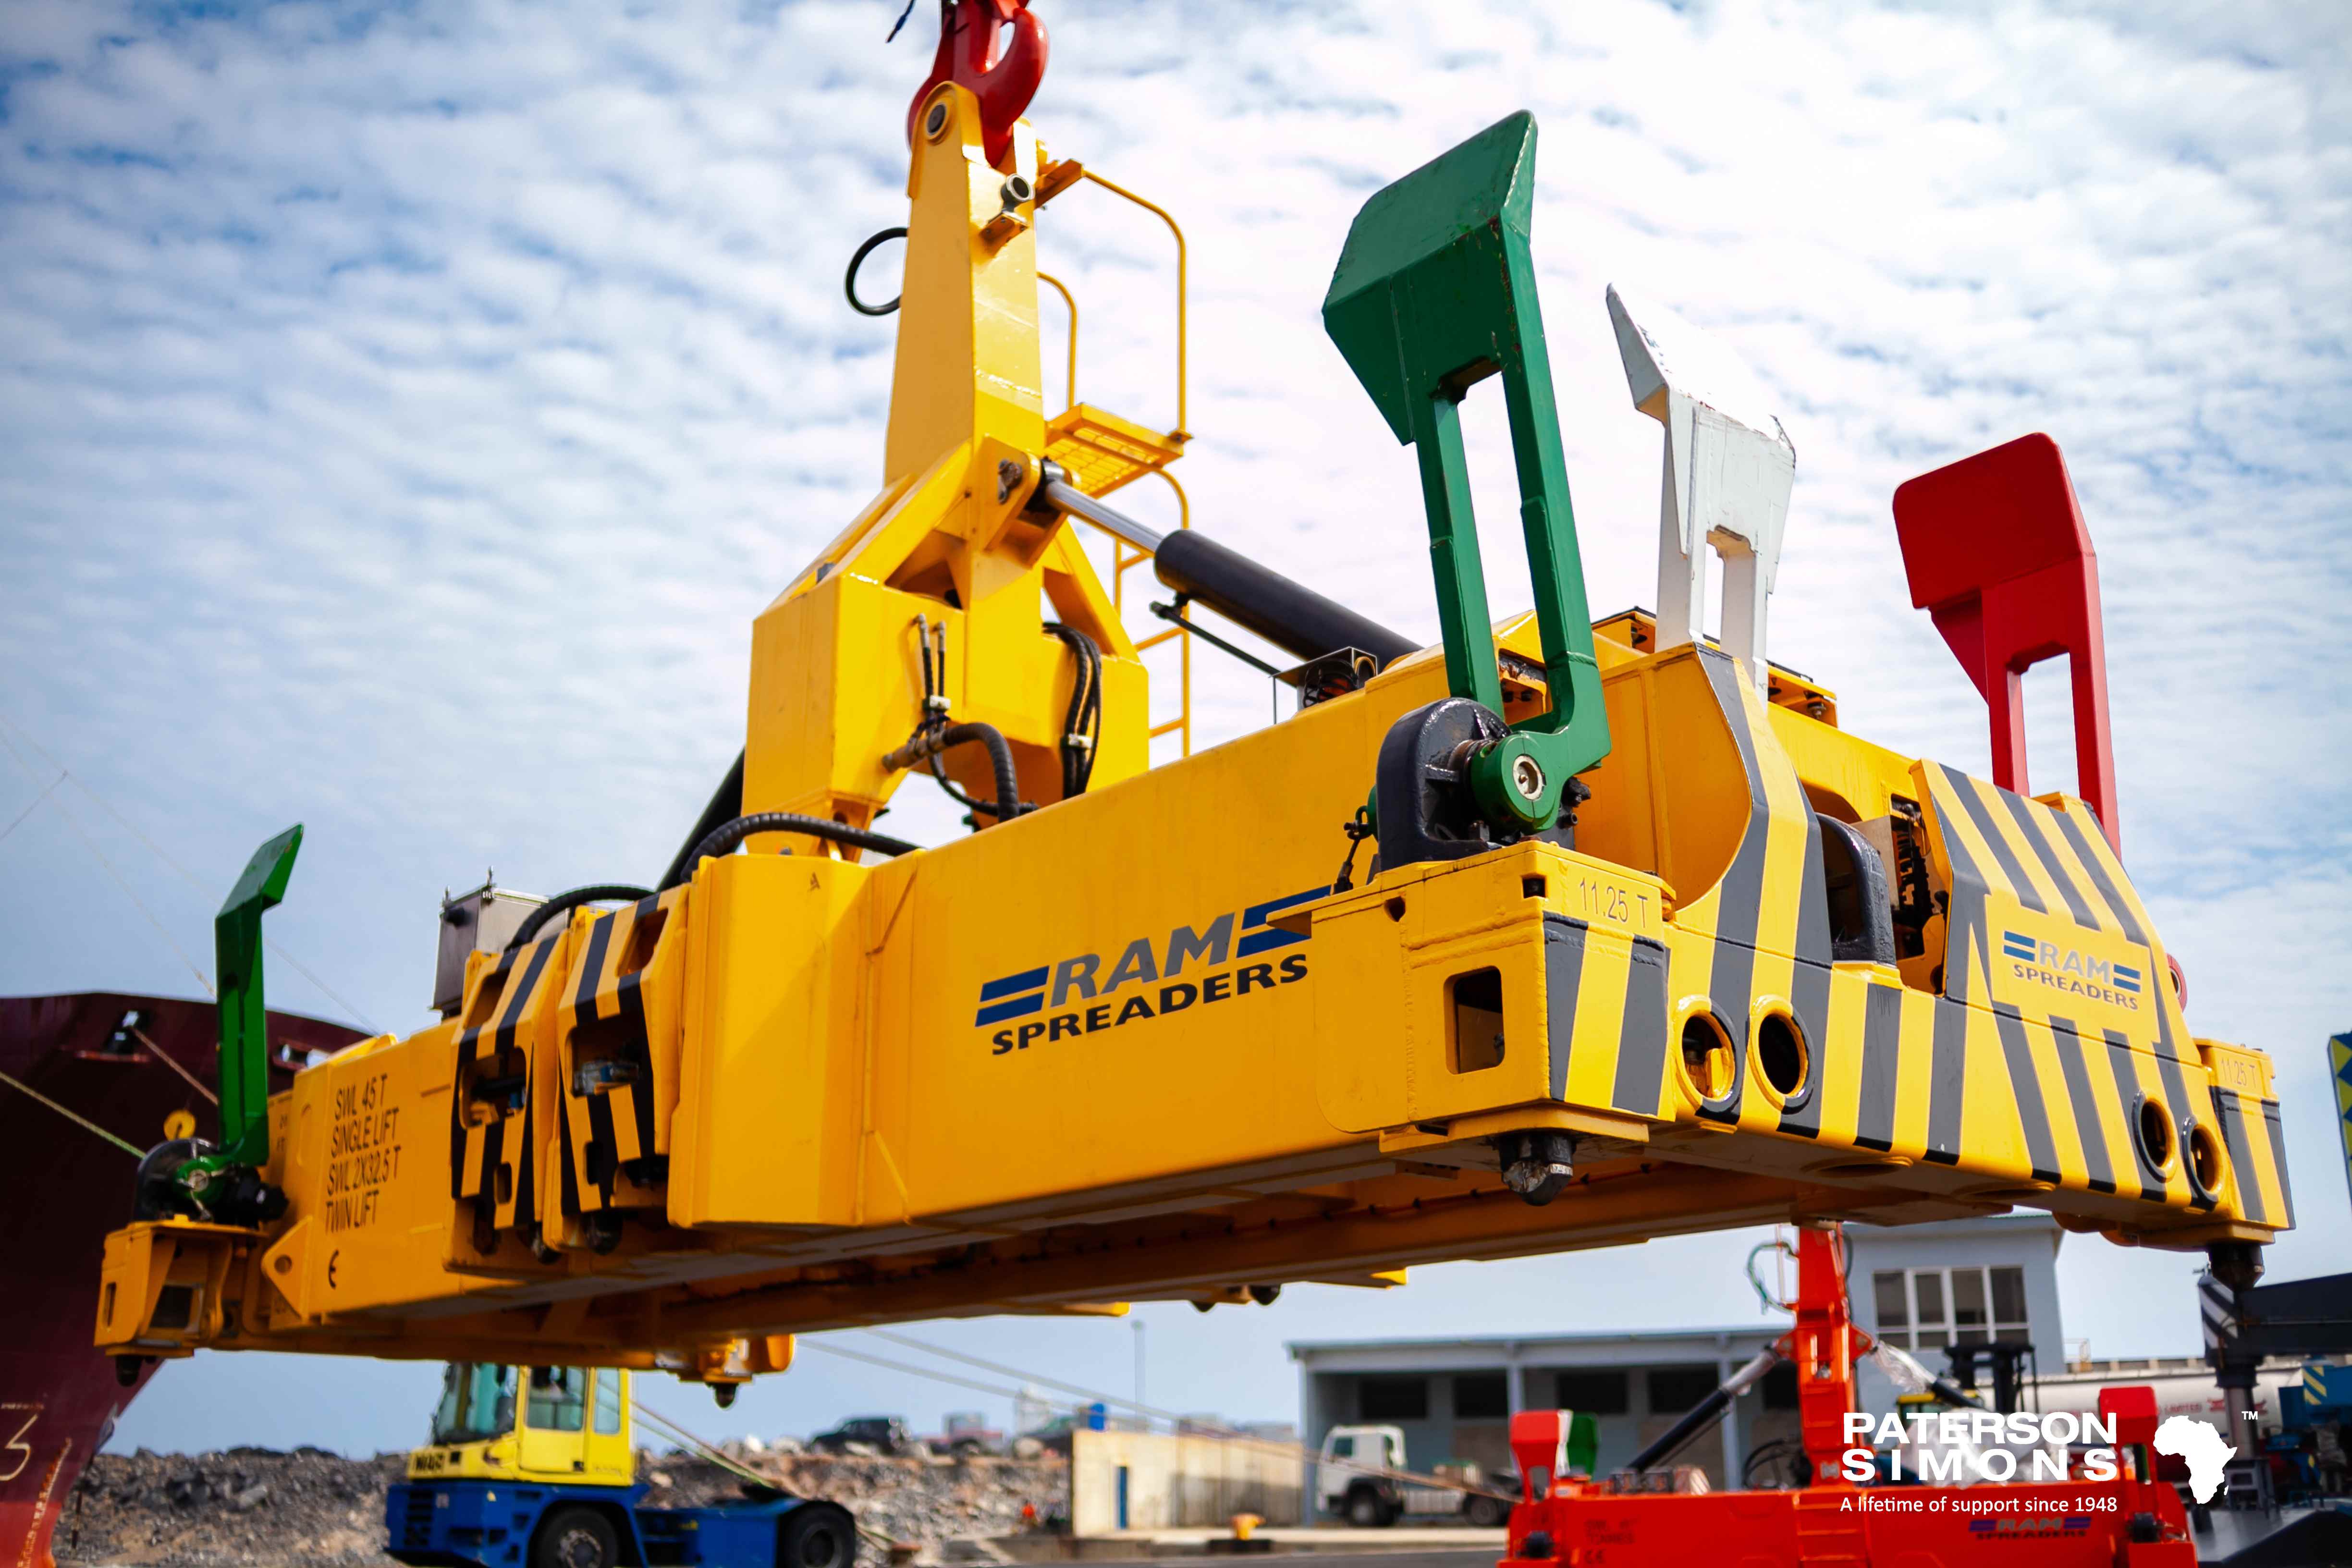 RAM Spreaders are designed to operate on ship-to-shore cranes, yard stacking cranes, jib cranes, MHCs, traddle carriers, reach stackers & front loaders.